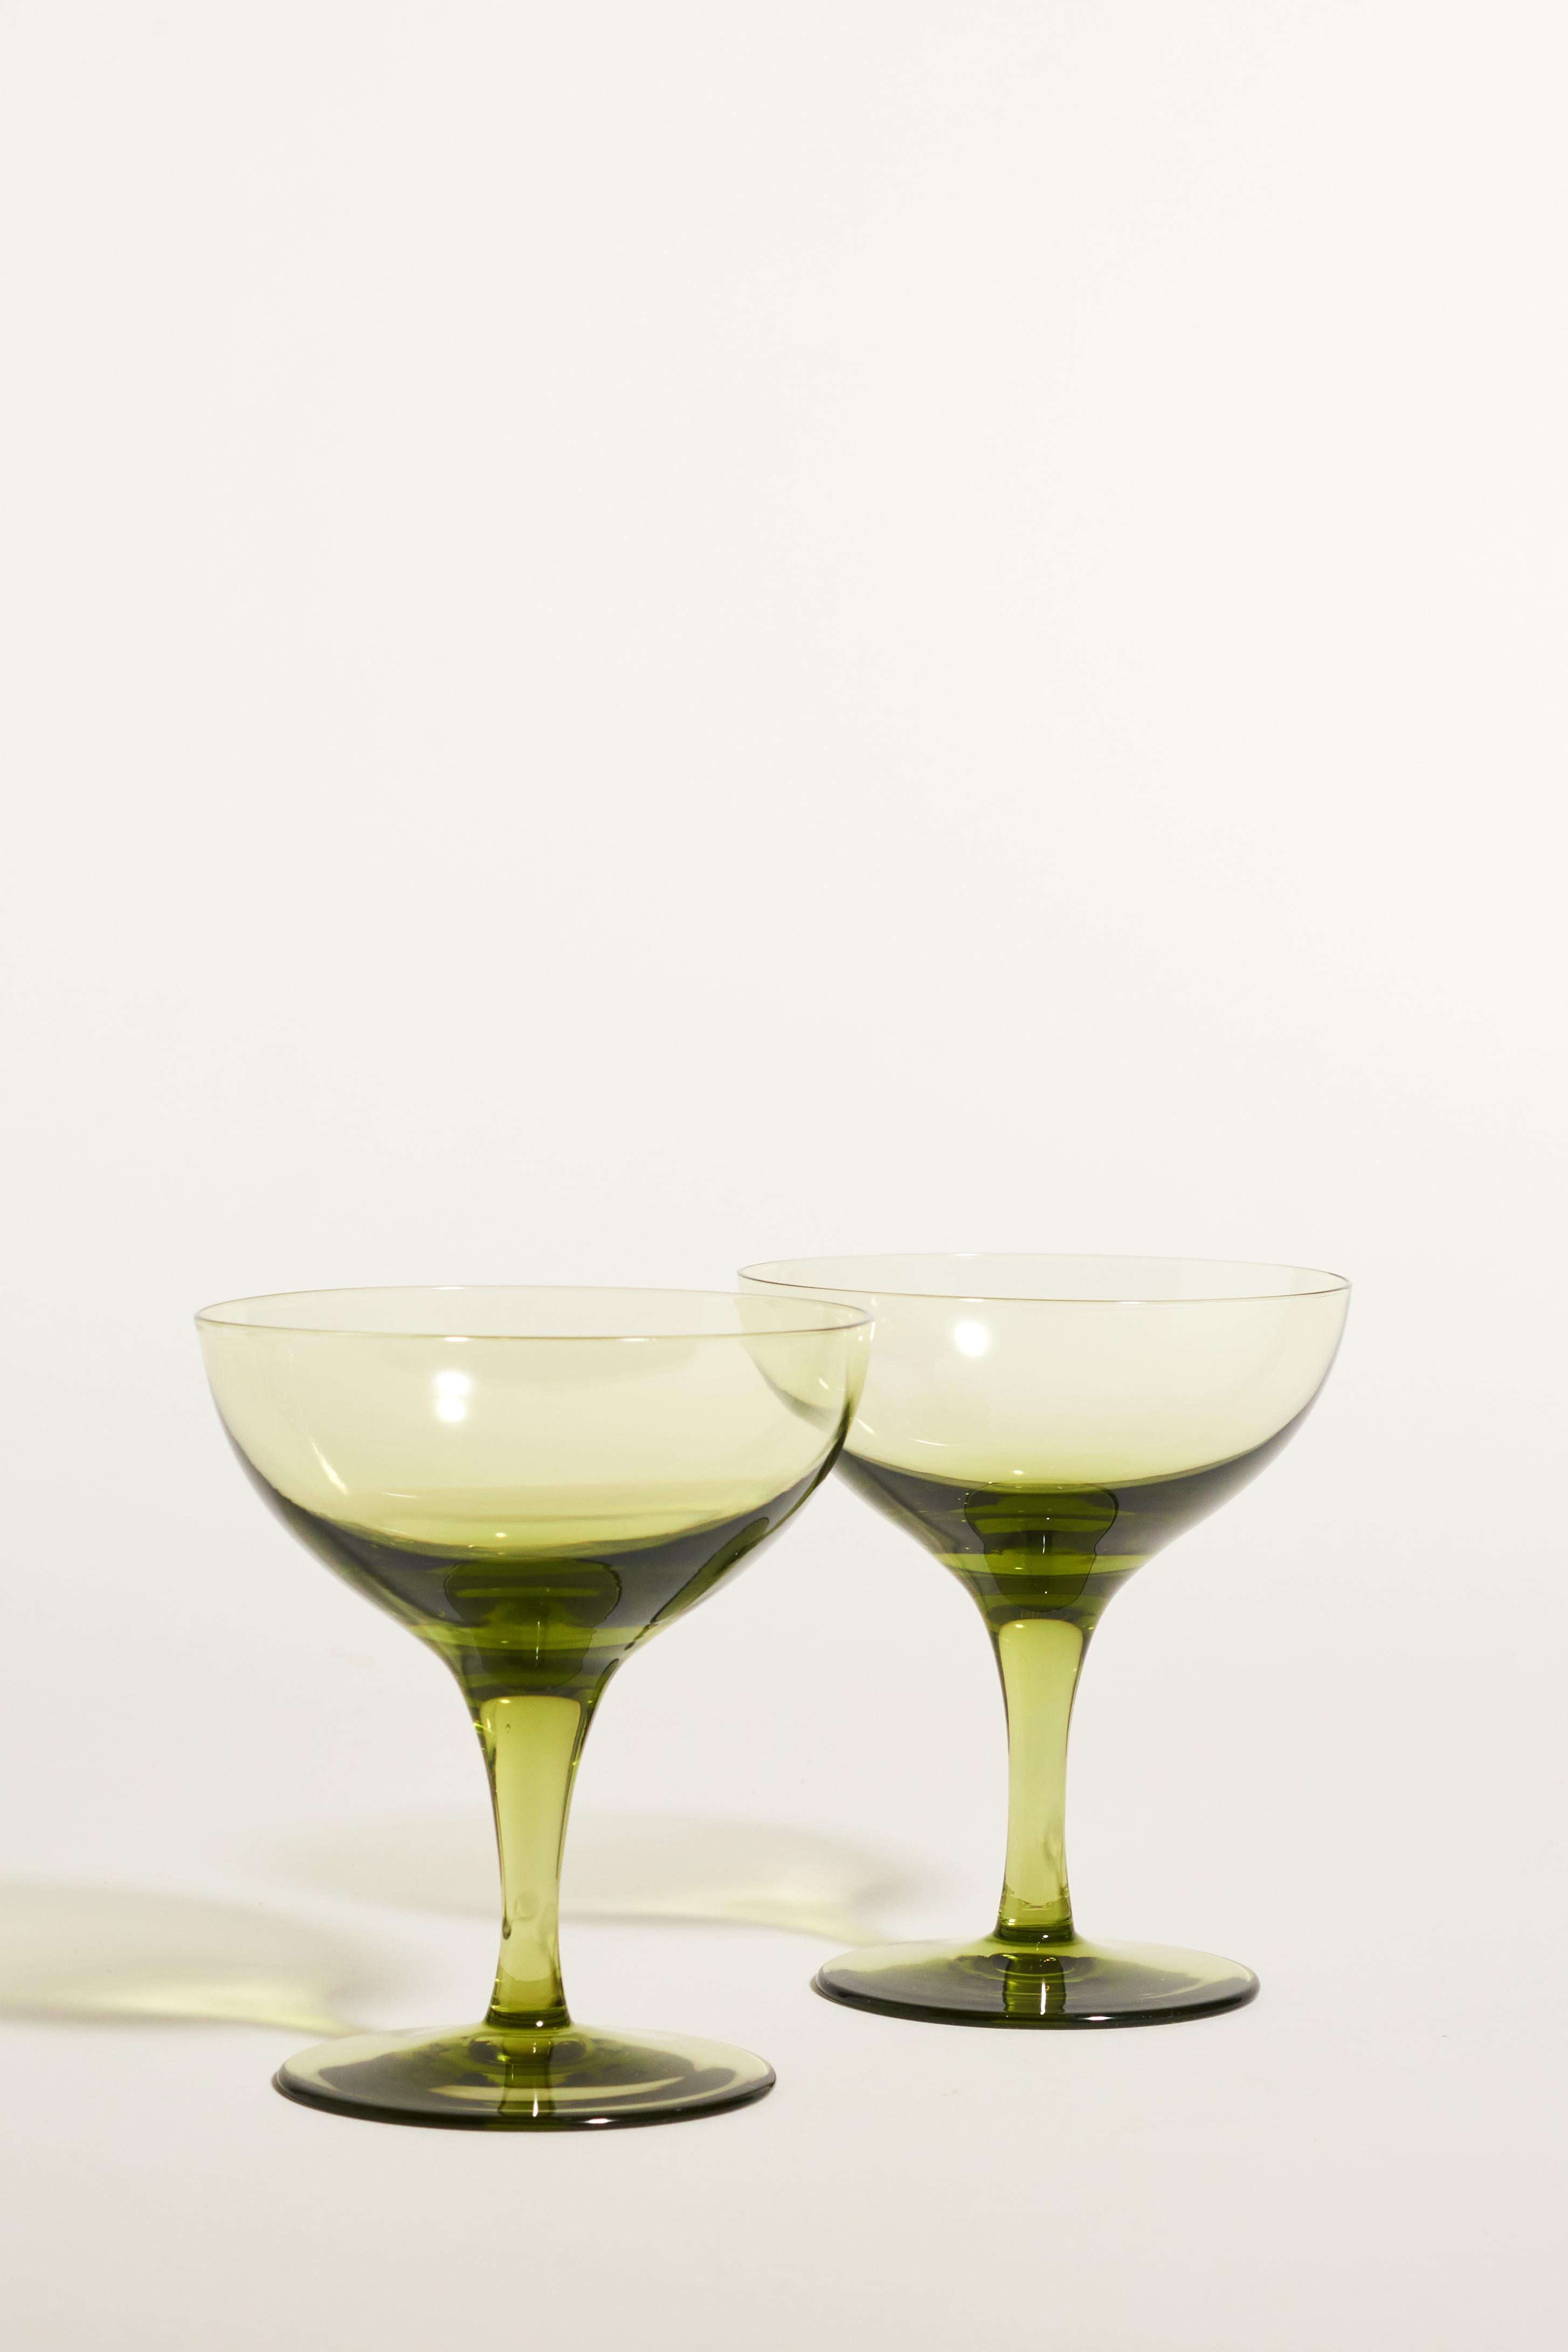 Olive green cocktail glasses in classic coupe shape, set of four.